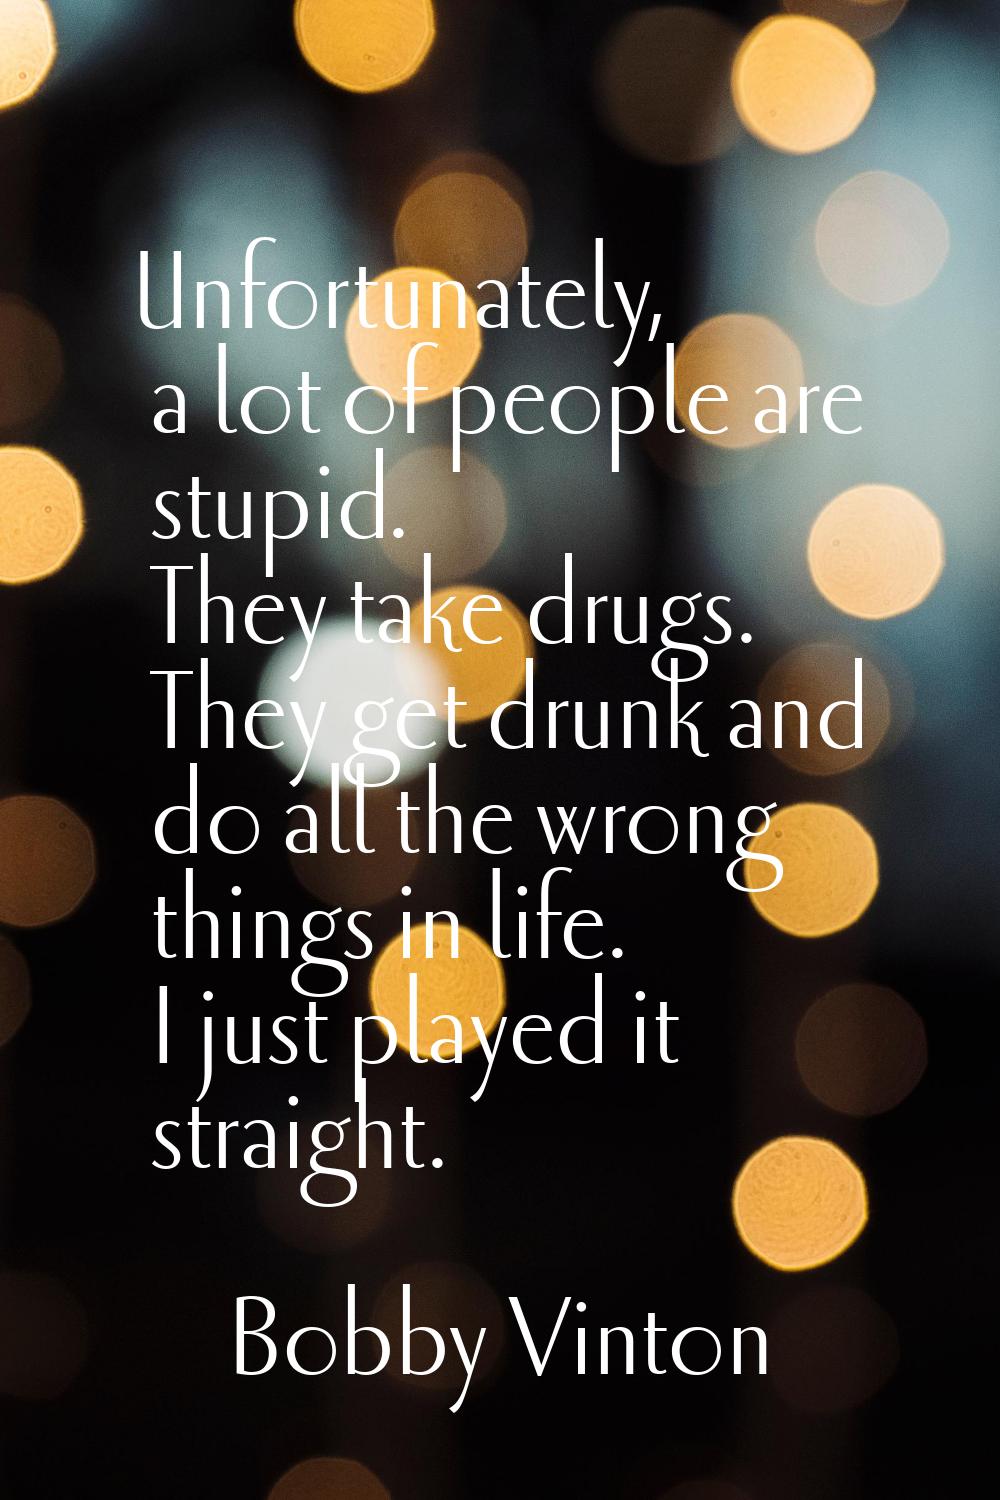 Unfortunately, a lot of people are stupid. They take drugs. They get drunk and do all the wrong thi